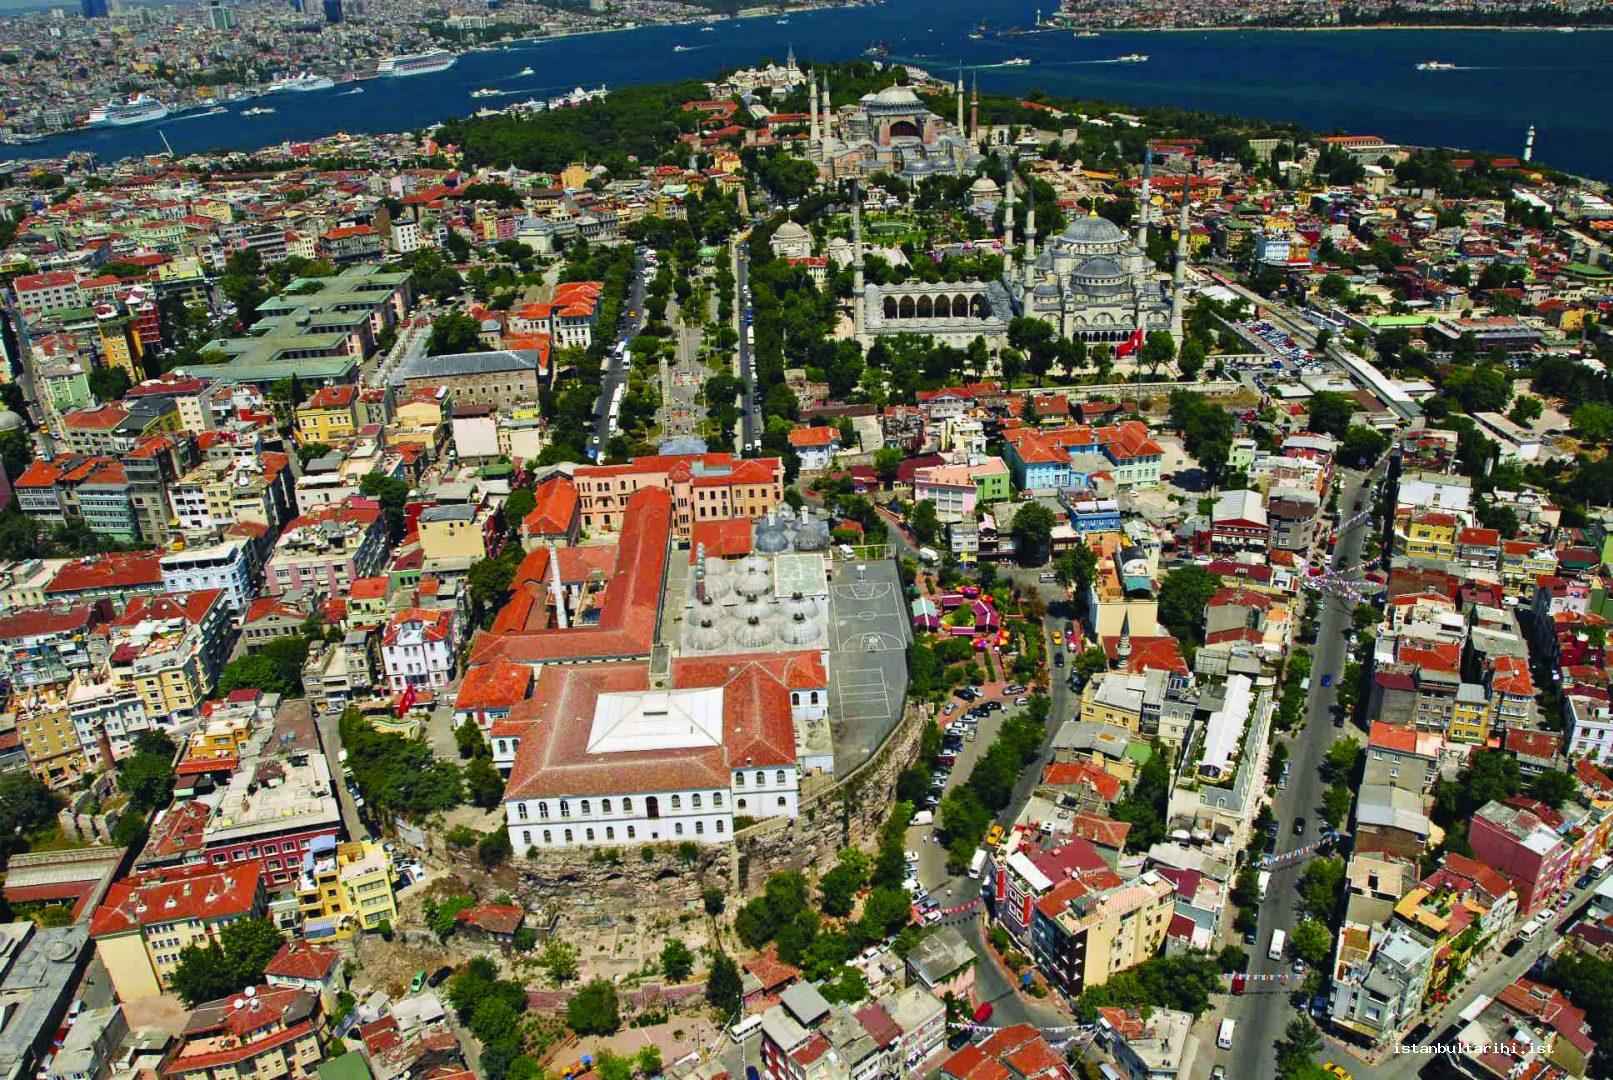 5- The district where the center of Constantinople was located: Hagia Sophia, Hippodrome, and the remnants of imperial palace